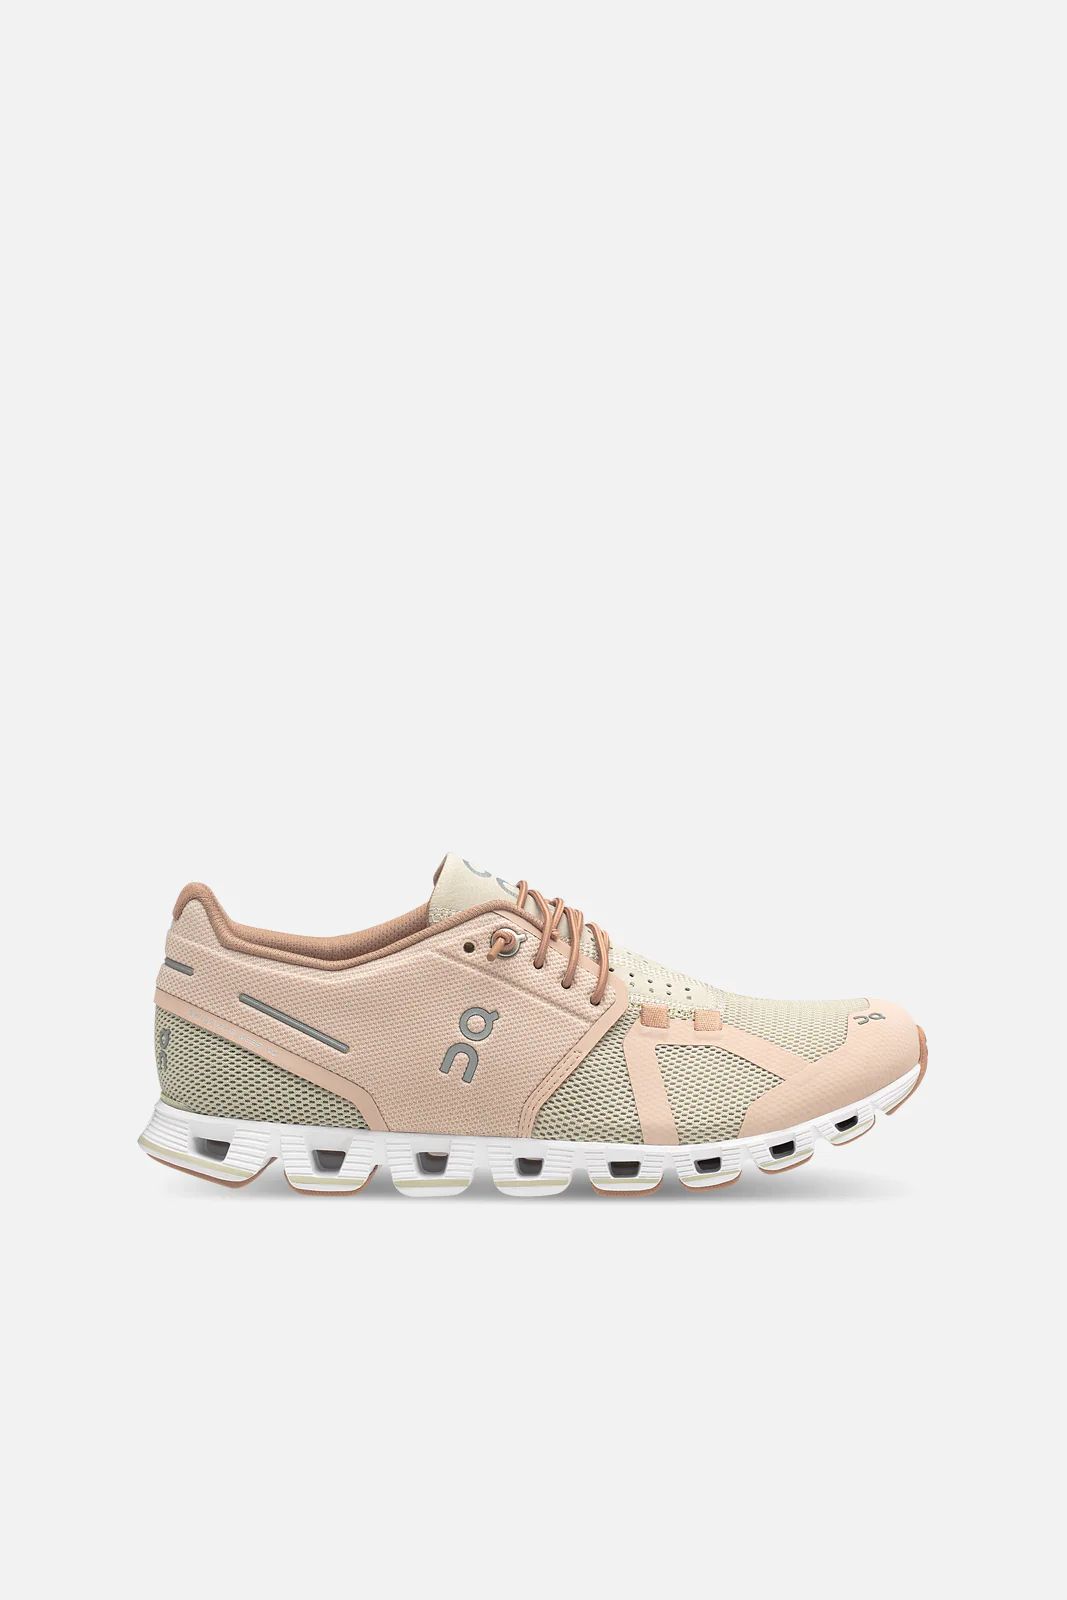 On Running Cloud Sneakers in Rose/Sand Size 5 Bandier | Bandier